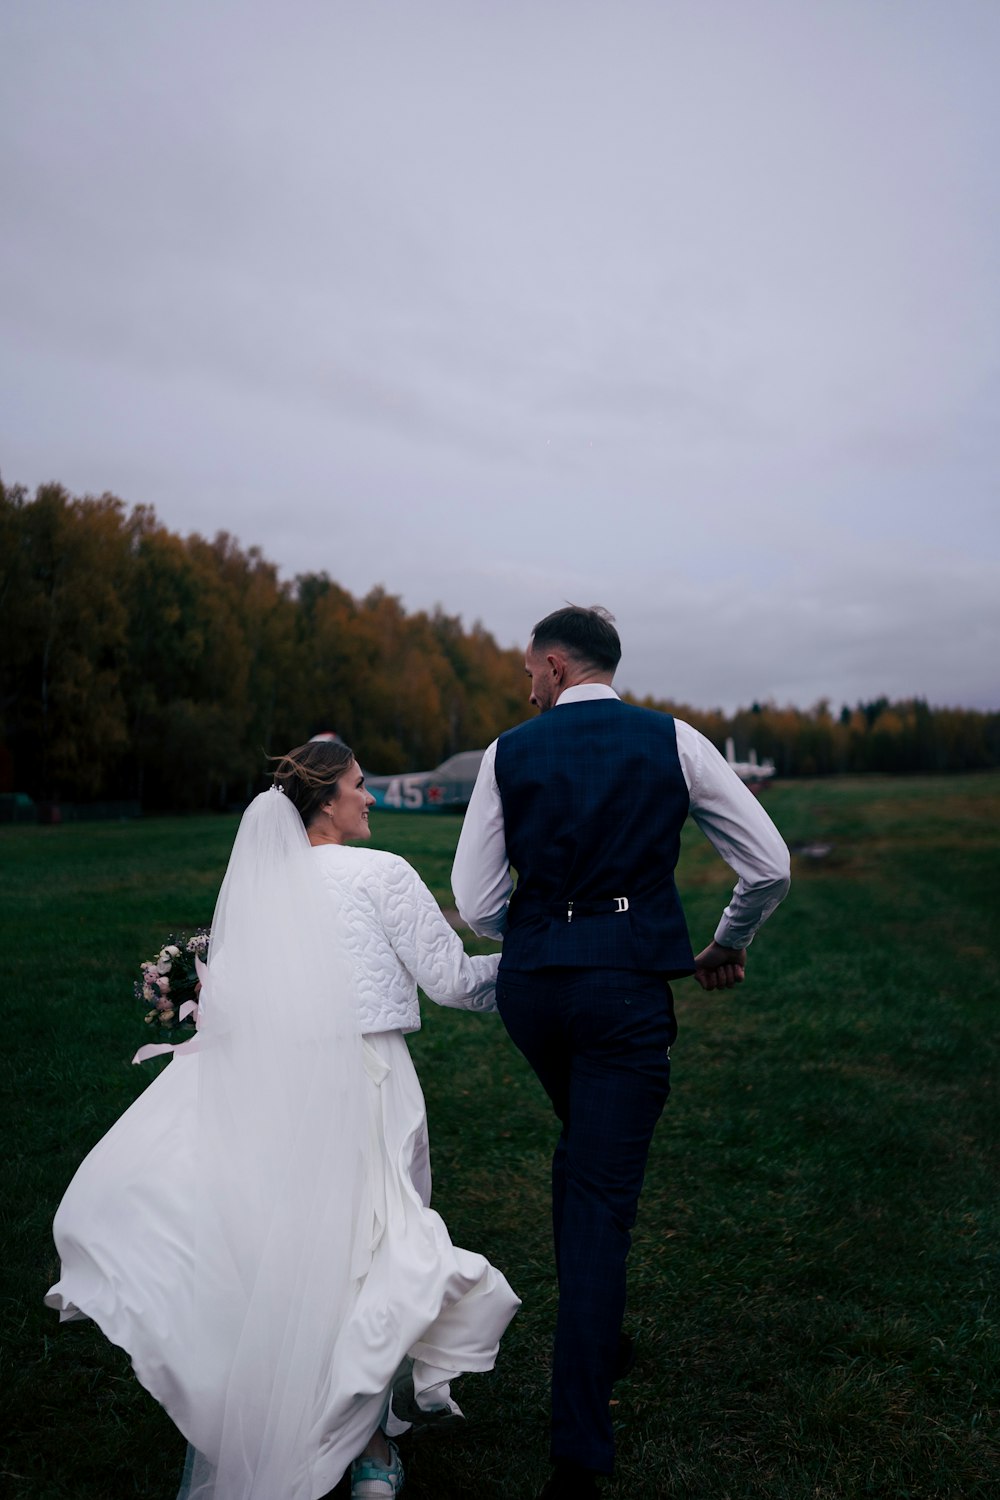 a bride and groom walking through a field